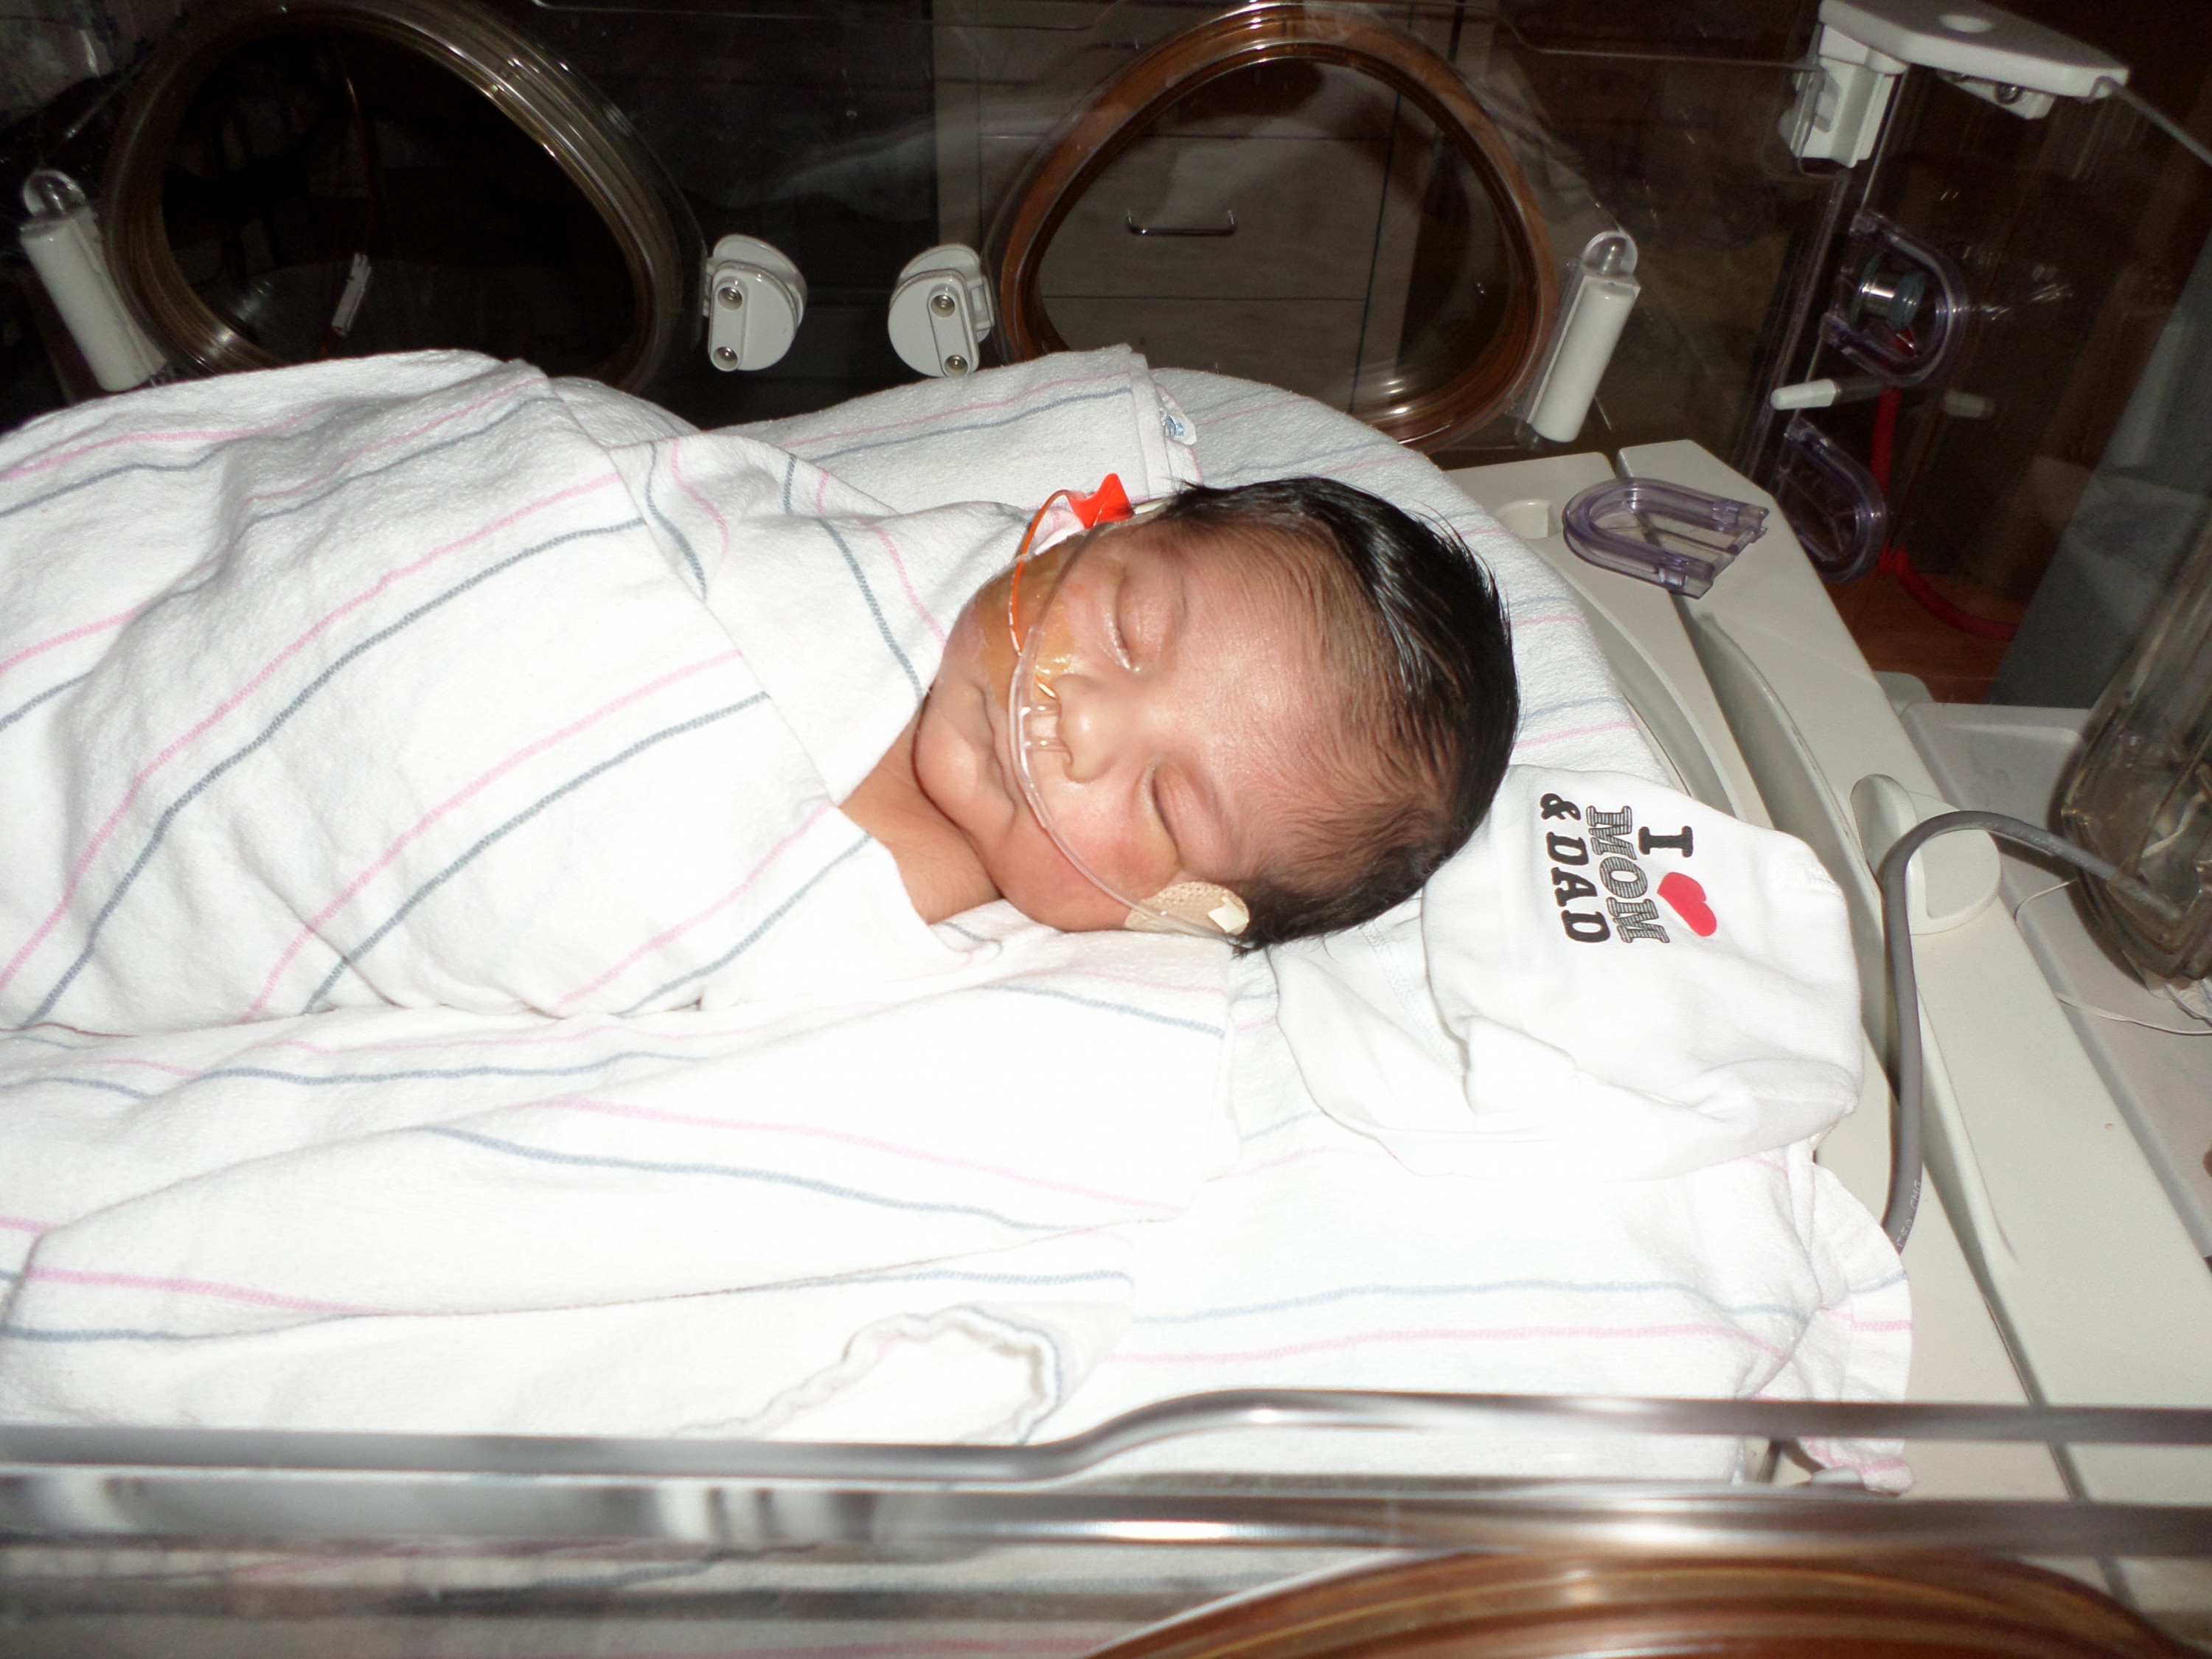 Mateo as a baby, in the neonatal intensive care unit